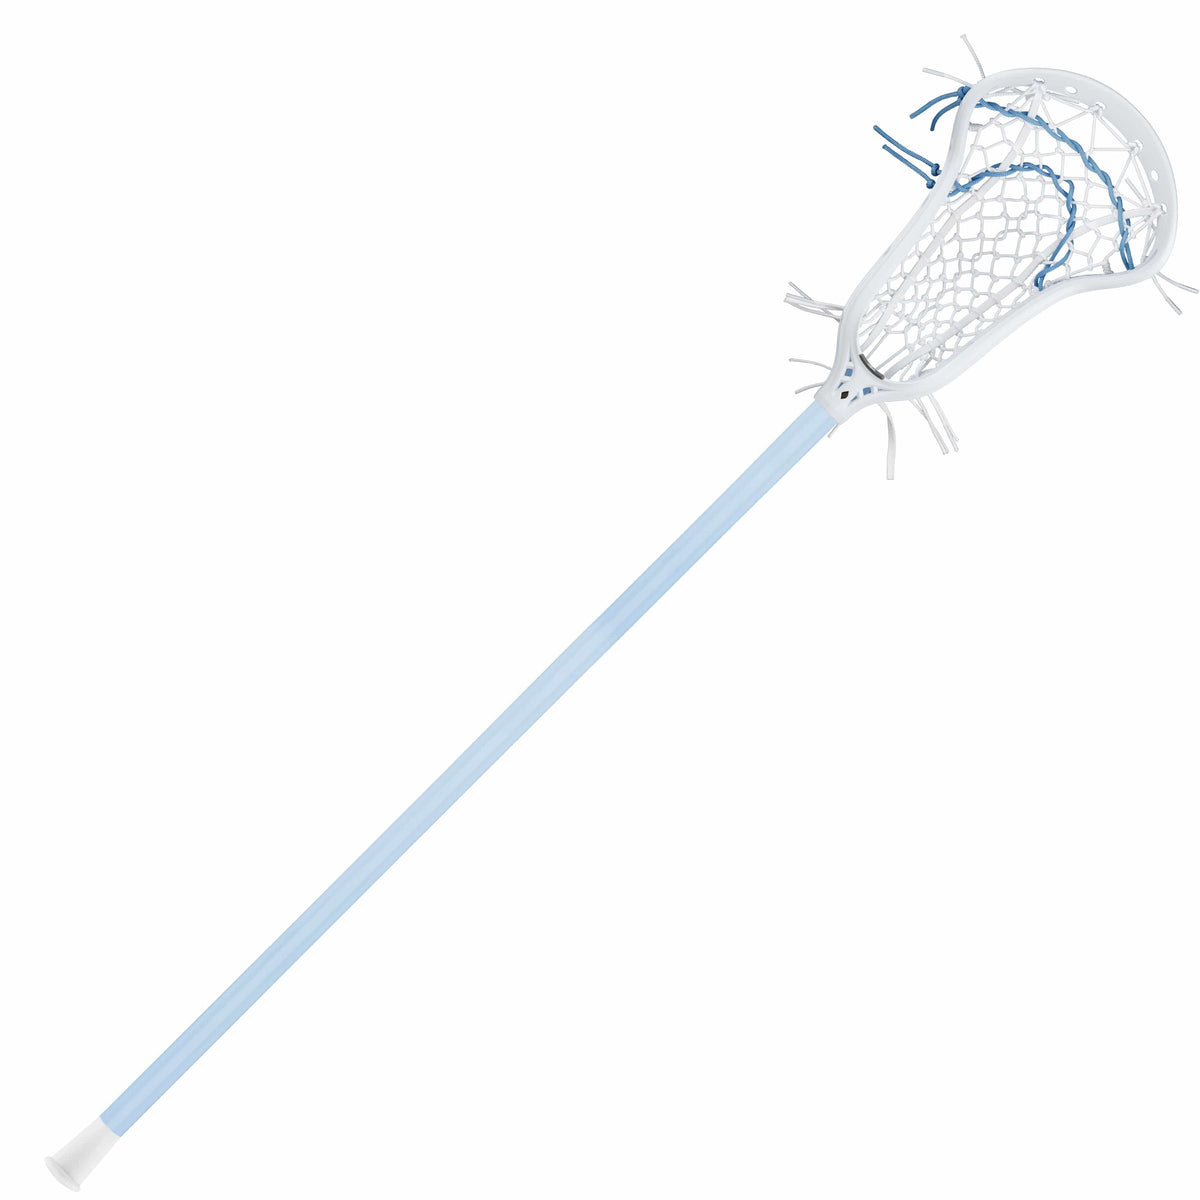 StringKing Womens Complete Sticks Carolina/White StringKing Womens Complete 2 Pro Defense Lacrosse Stick With Tech Trad and Composite Pro Shaft from Lacrosse Fanatic